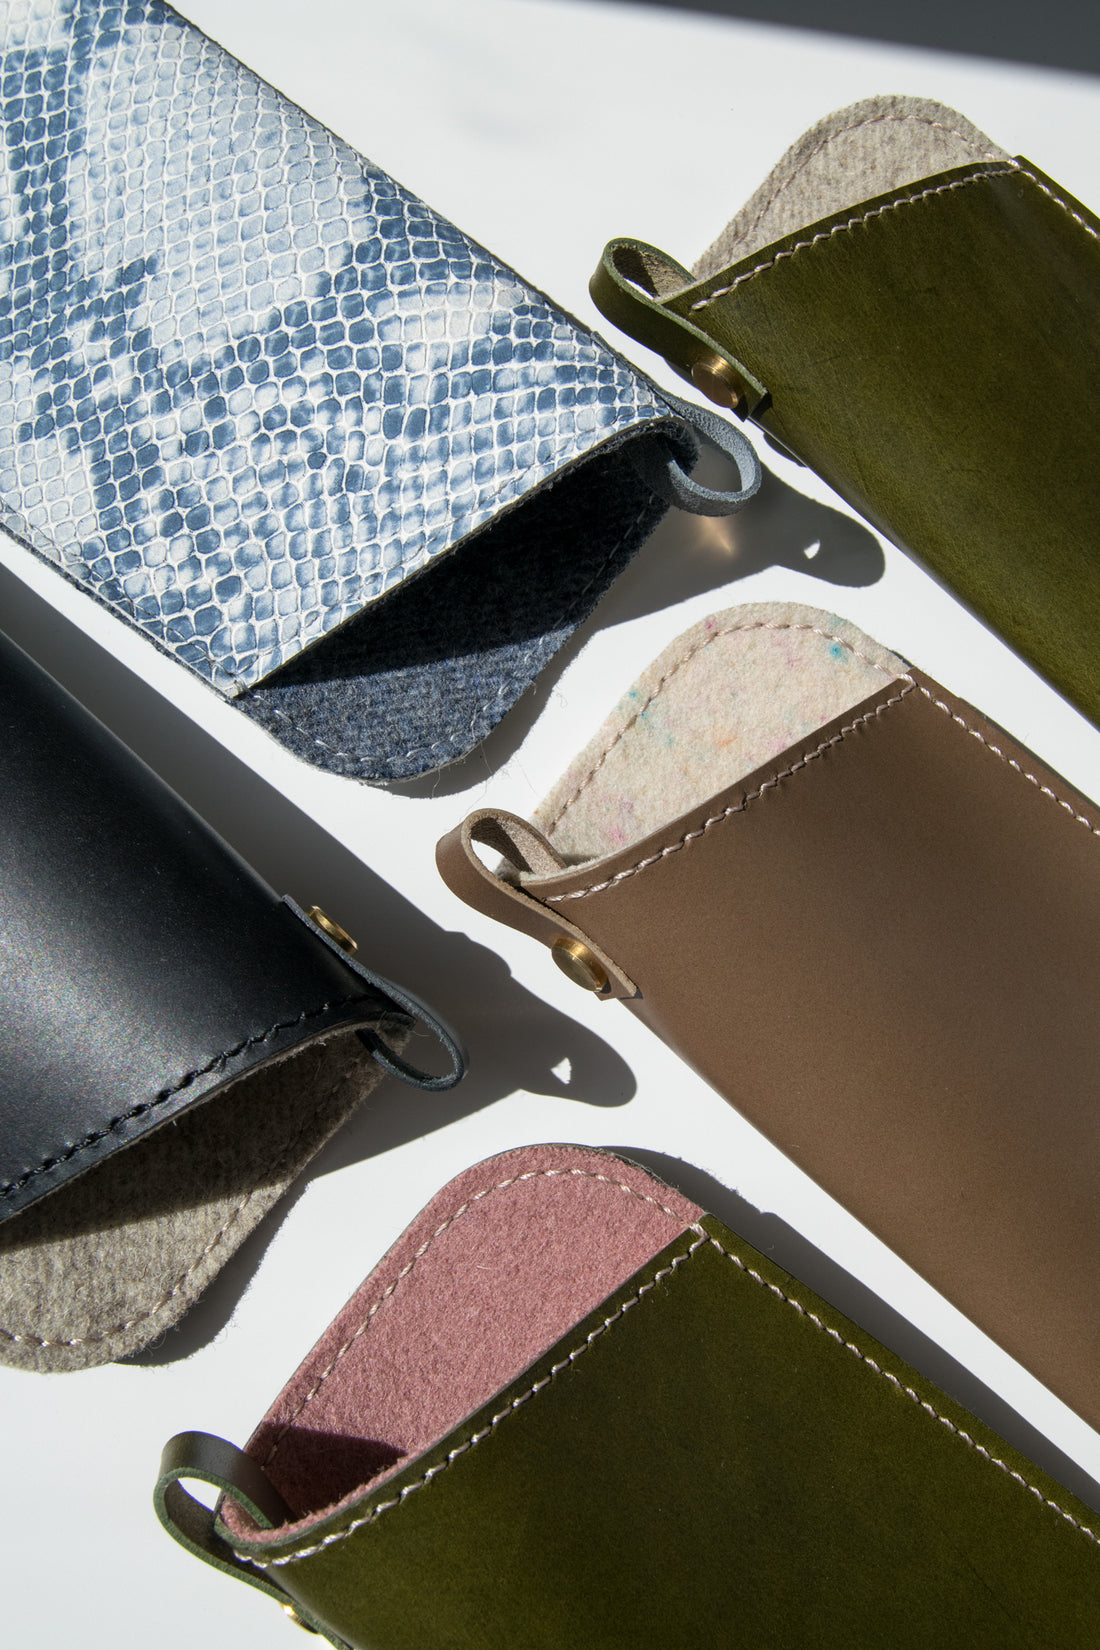 A flatlay of 5 leather sunglasses sleeves in blue, olive green, black and light brown leather.